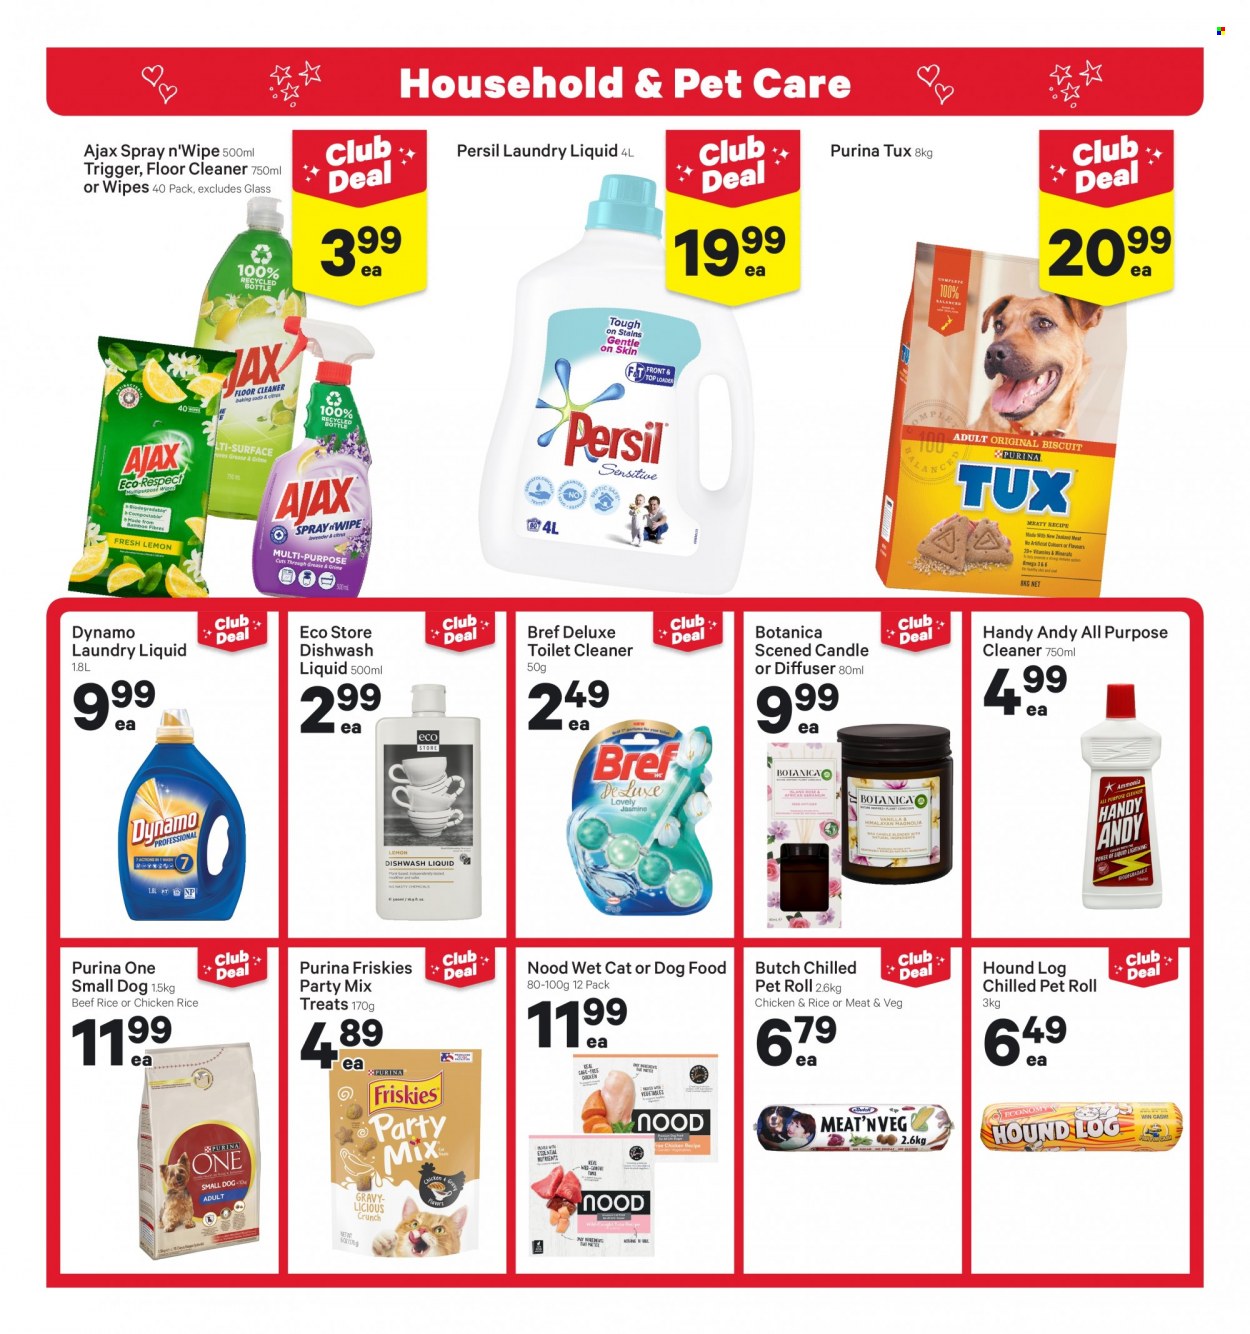 thumbnail - New World mailer - 11.10.2021 - 17.10.2021 - Sales products - biscuit, soda, wipes, cleaner, all purpose cleaner, floor cleaner, toilet cleaner, Ajax, Persil, laundry detergent, dishwashing liquid, candle, diffuser, cage, animal food, dog food, Purina, Friskies. Page 15.